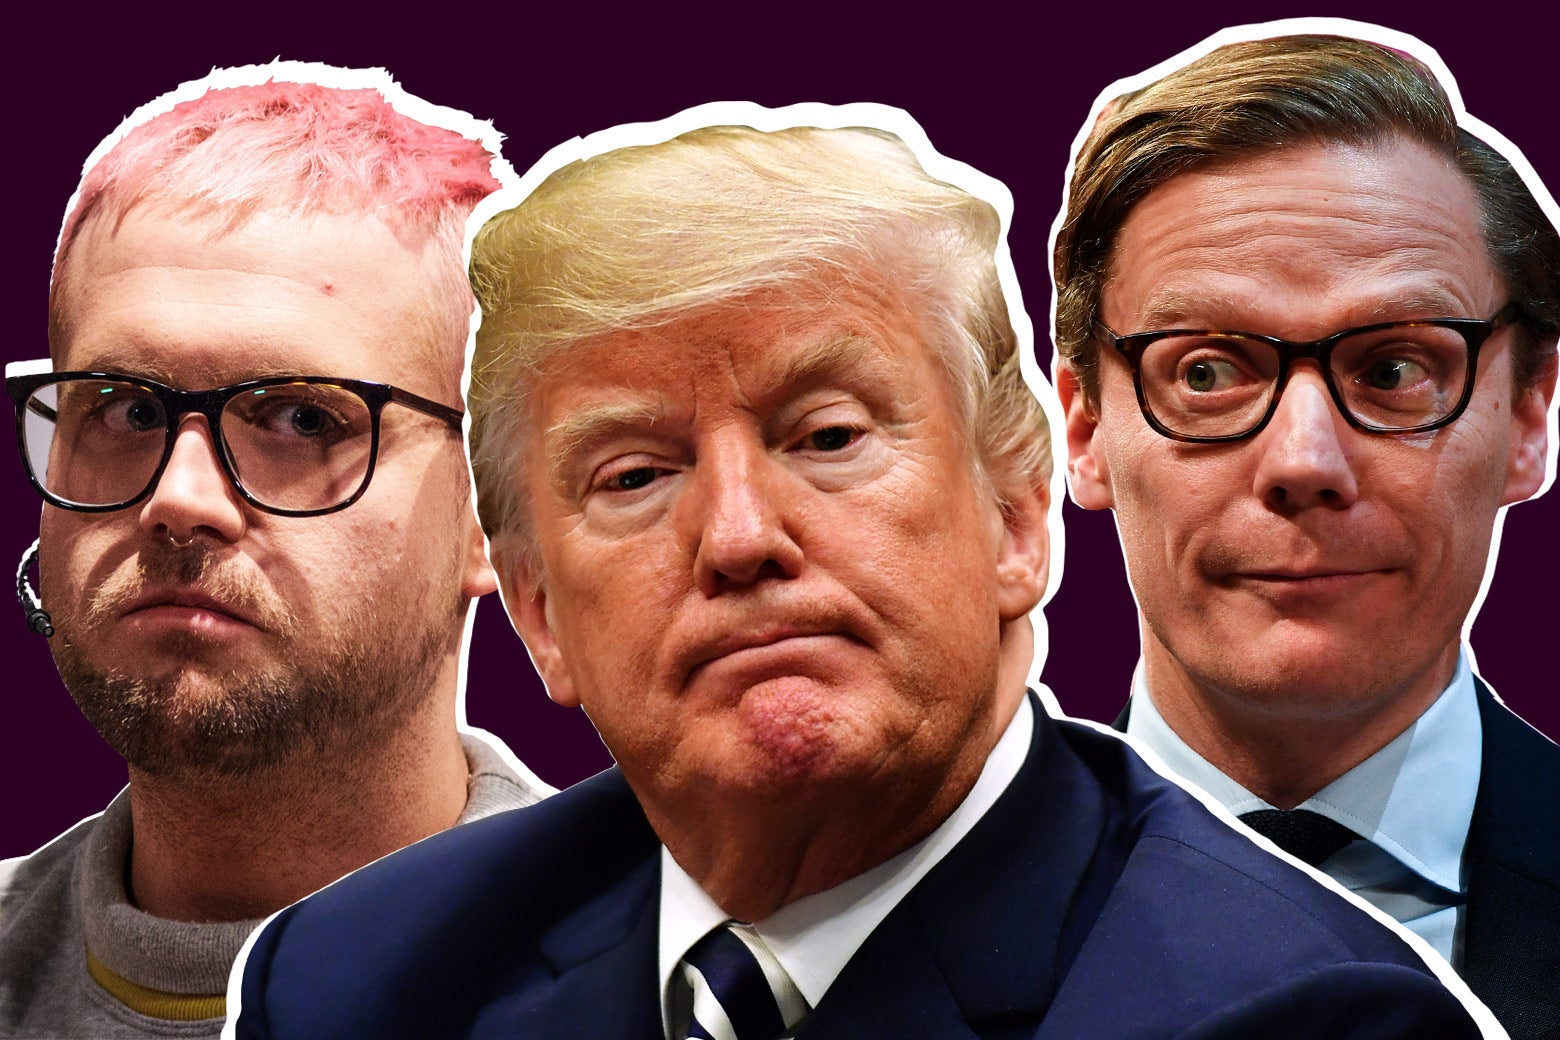 Cambridge Analytica whistleblower Christopher Wylie, US President Donald Trump, and Cambridge Analytica's chief executive officer Alexander Nix.